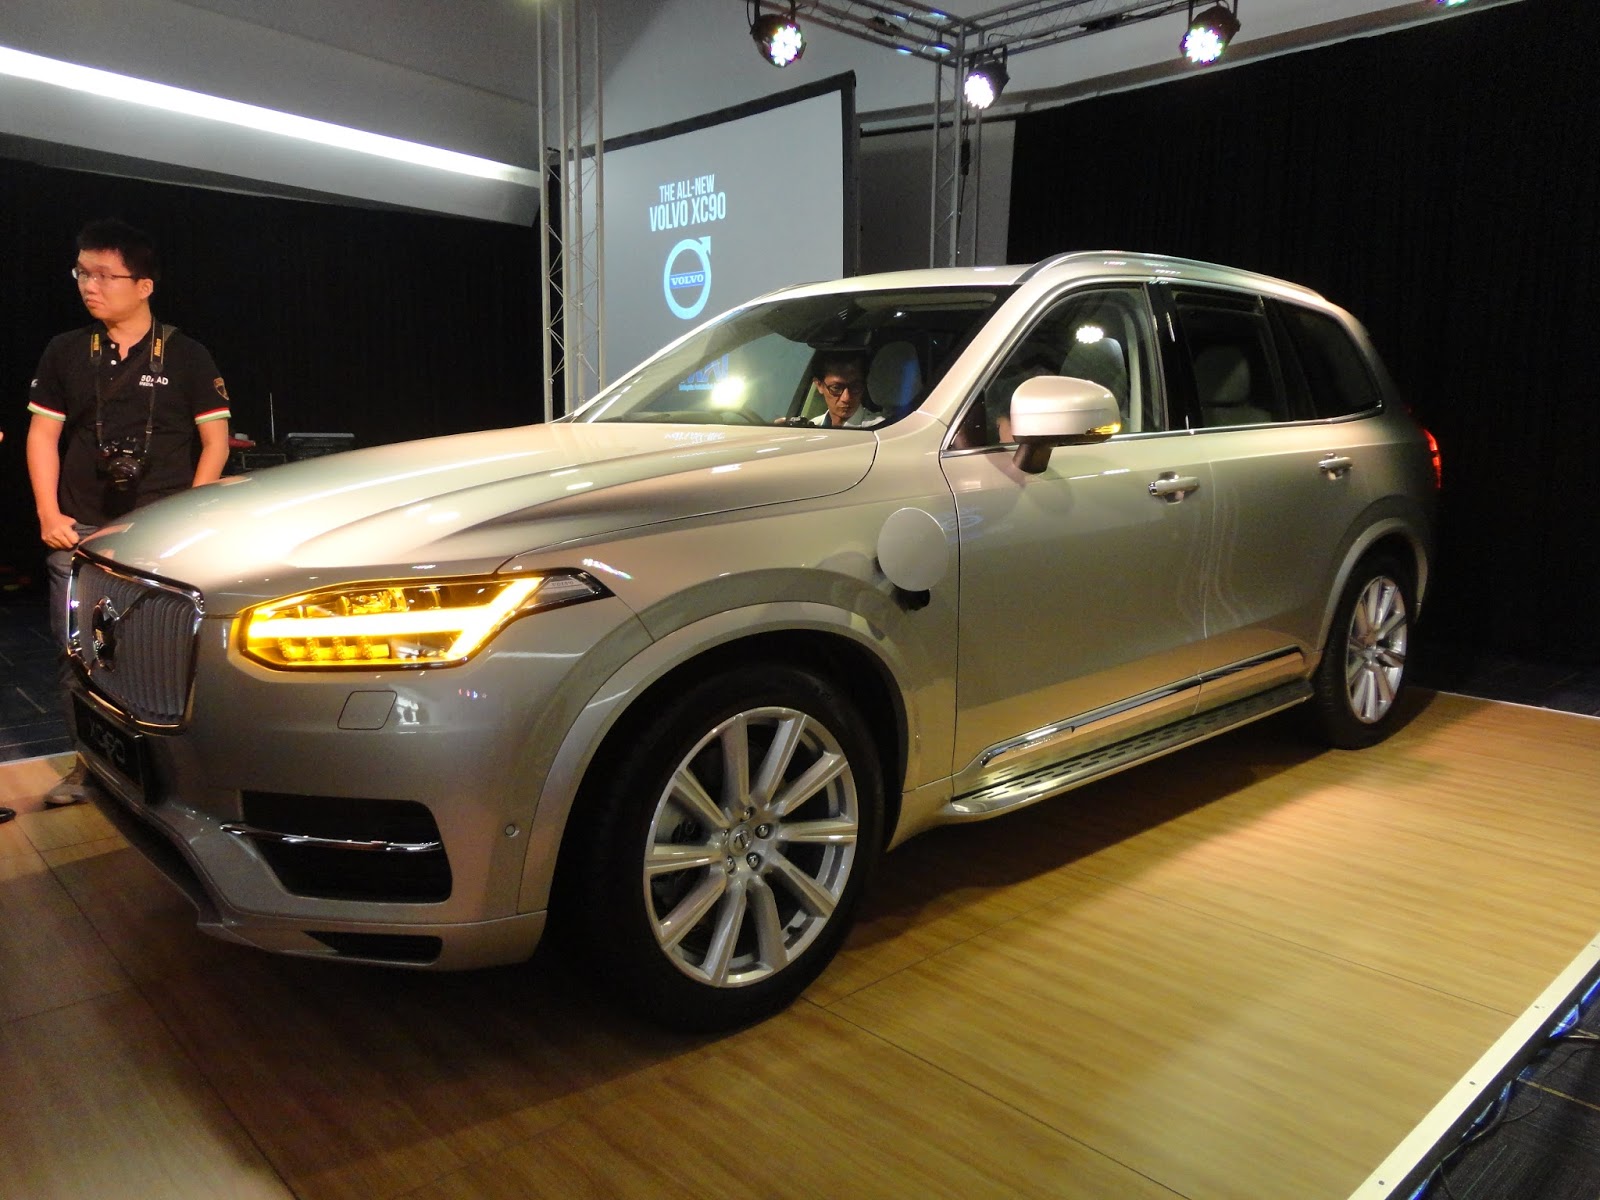 Motoring-Malaysia: Volvo Car Malaysia launches the all-new Volvo XC90